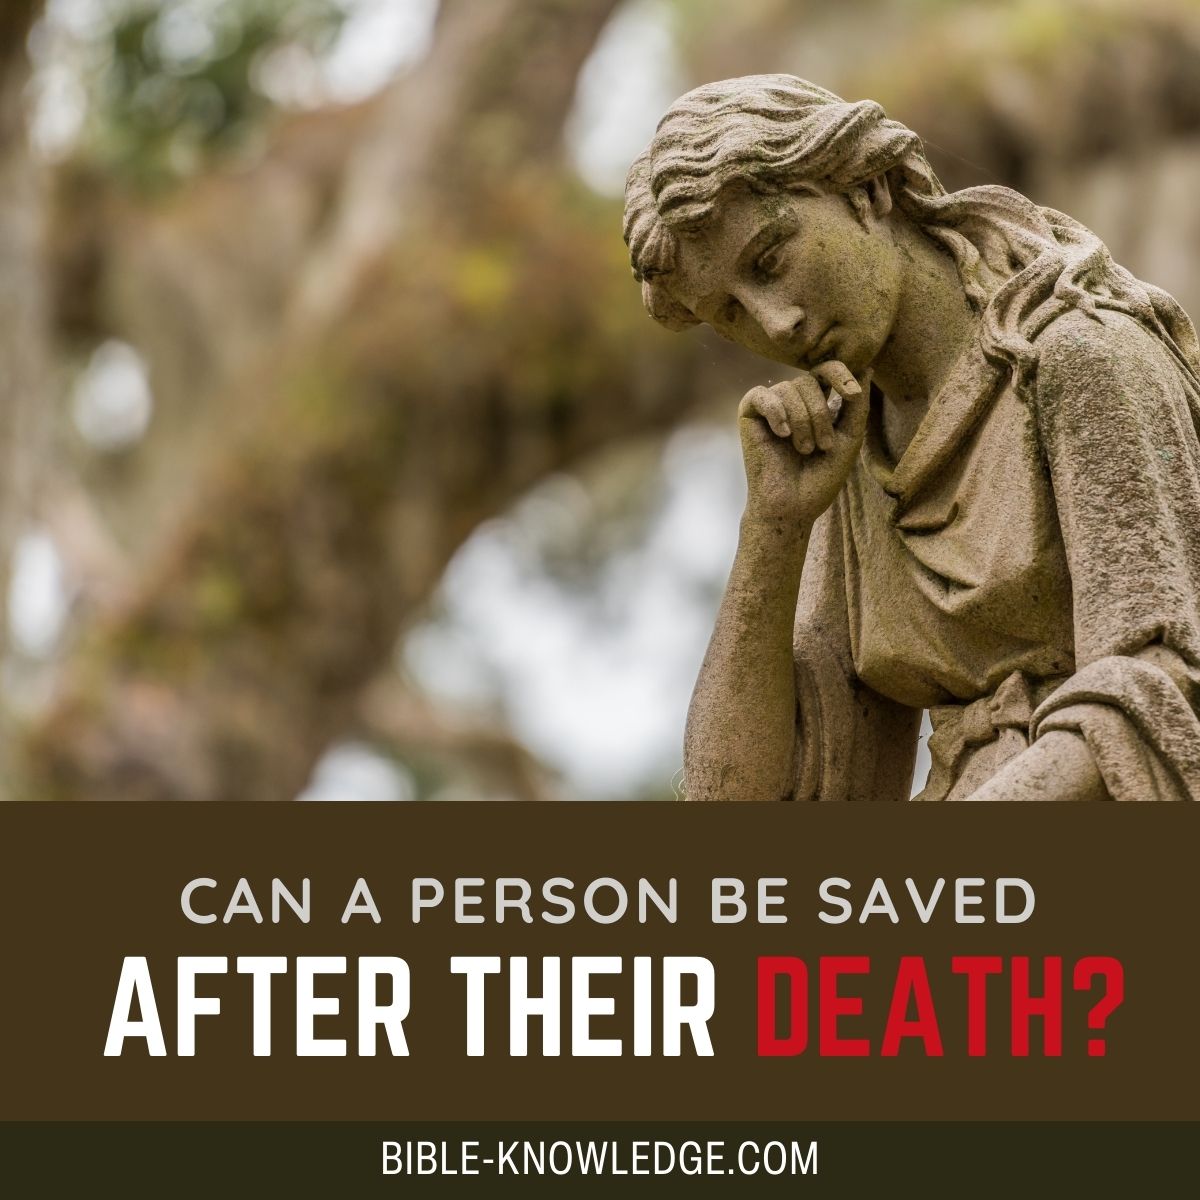 Can a Person Be Saved After Their Death?